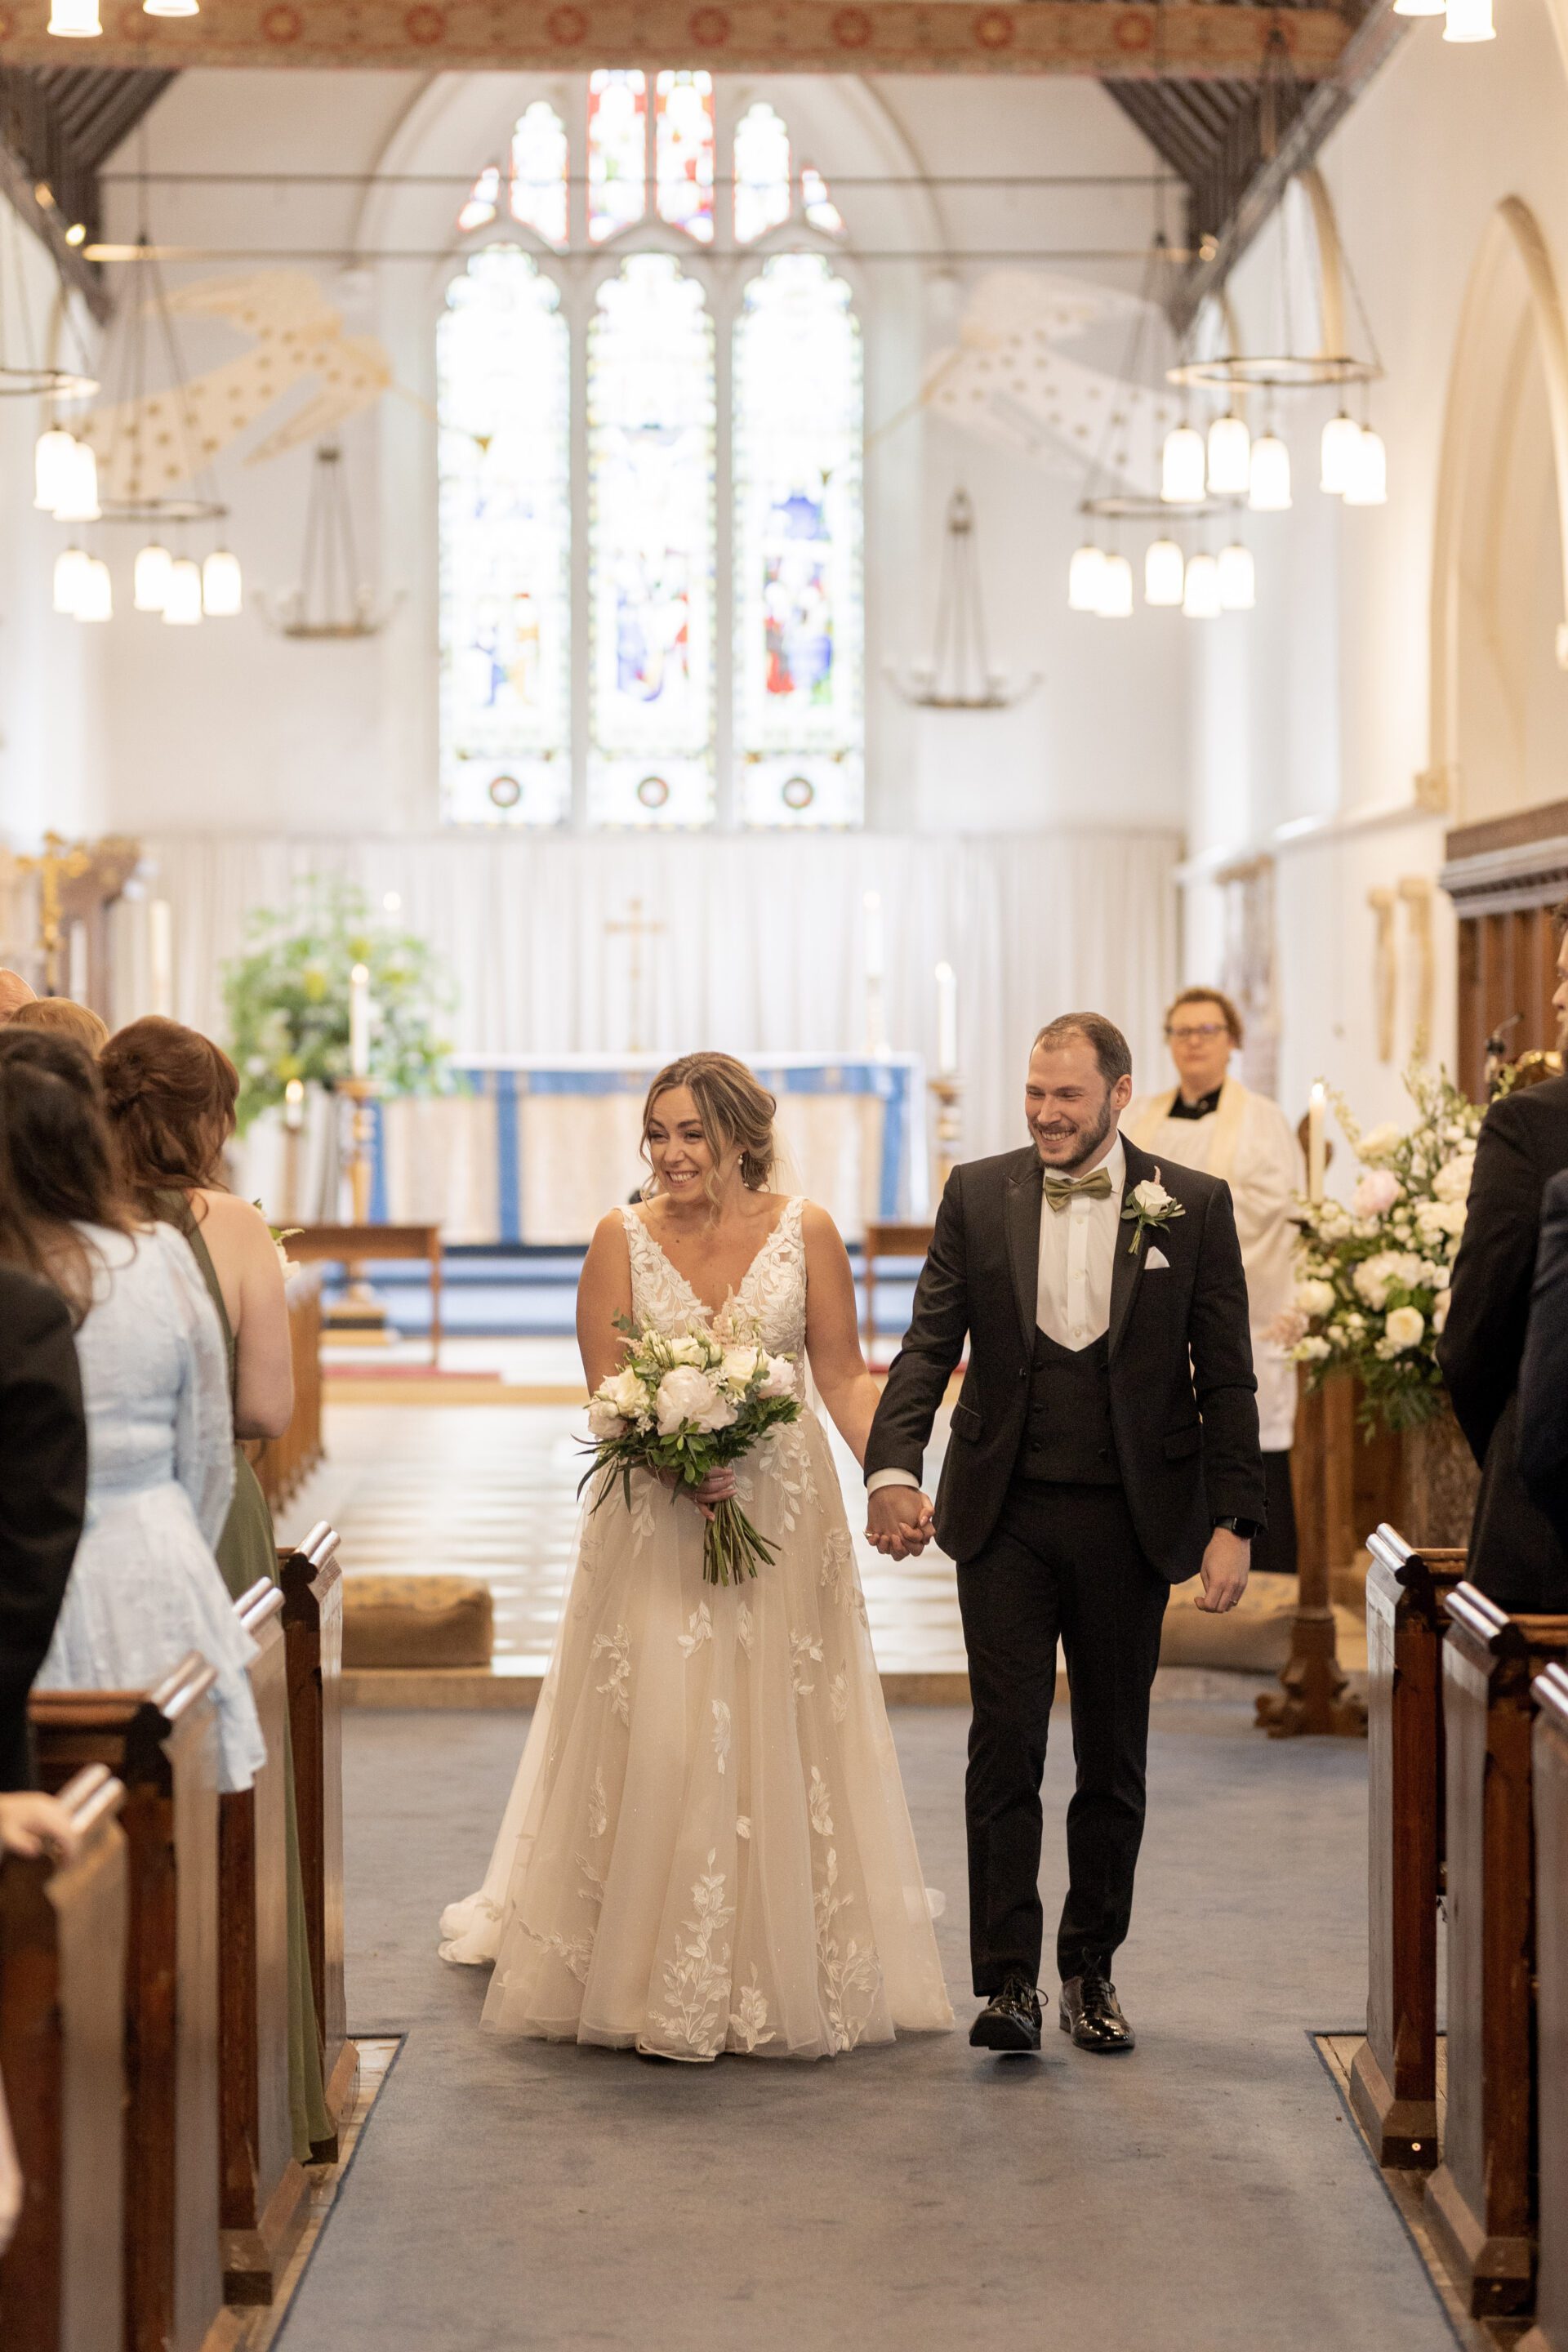 The bride and groom walk back down the aisle after getting married